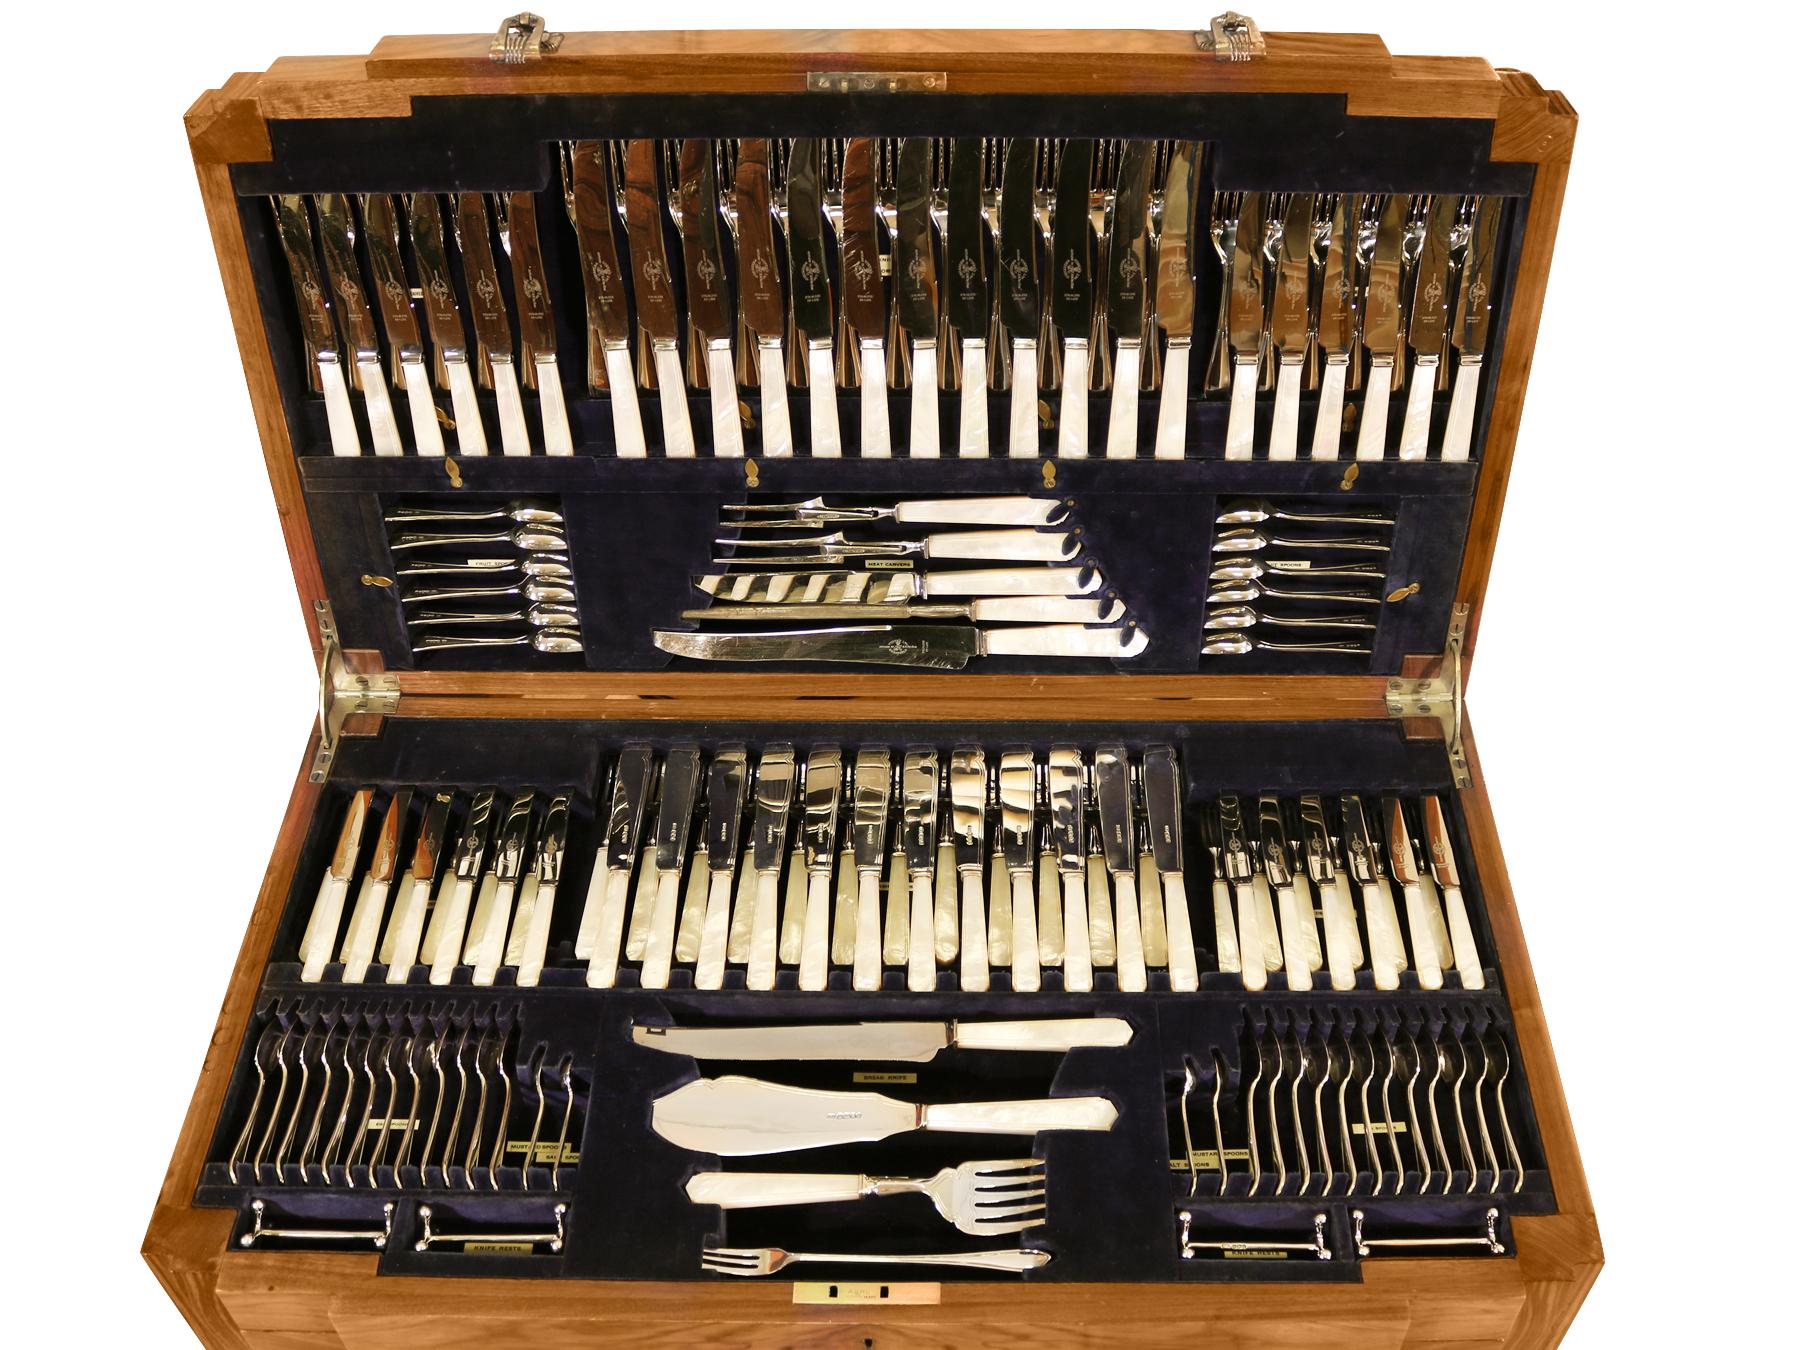 A magnificent, fine and impressive, comprehensive antique George V English sterling silver Sandringham pattern flatware service for twelve persons - boxed; an addition to our flatware collection

The pieces of this magnificent and comprehensive